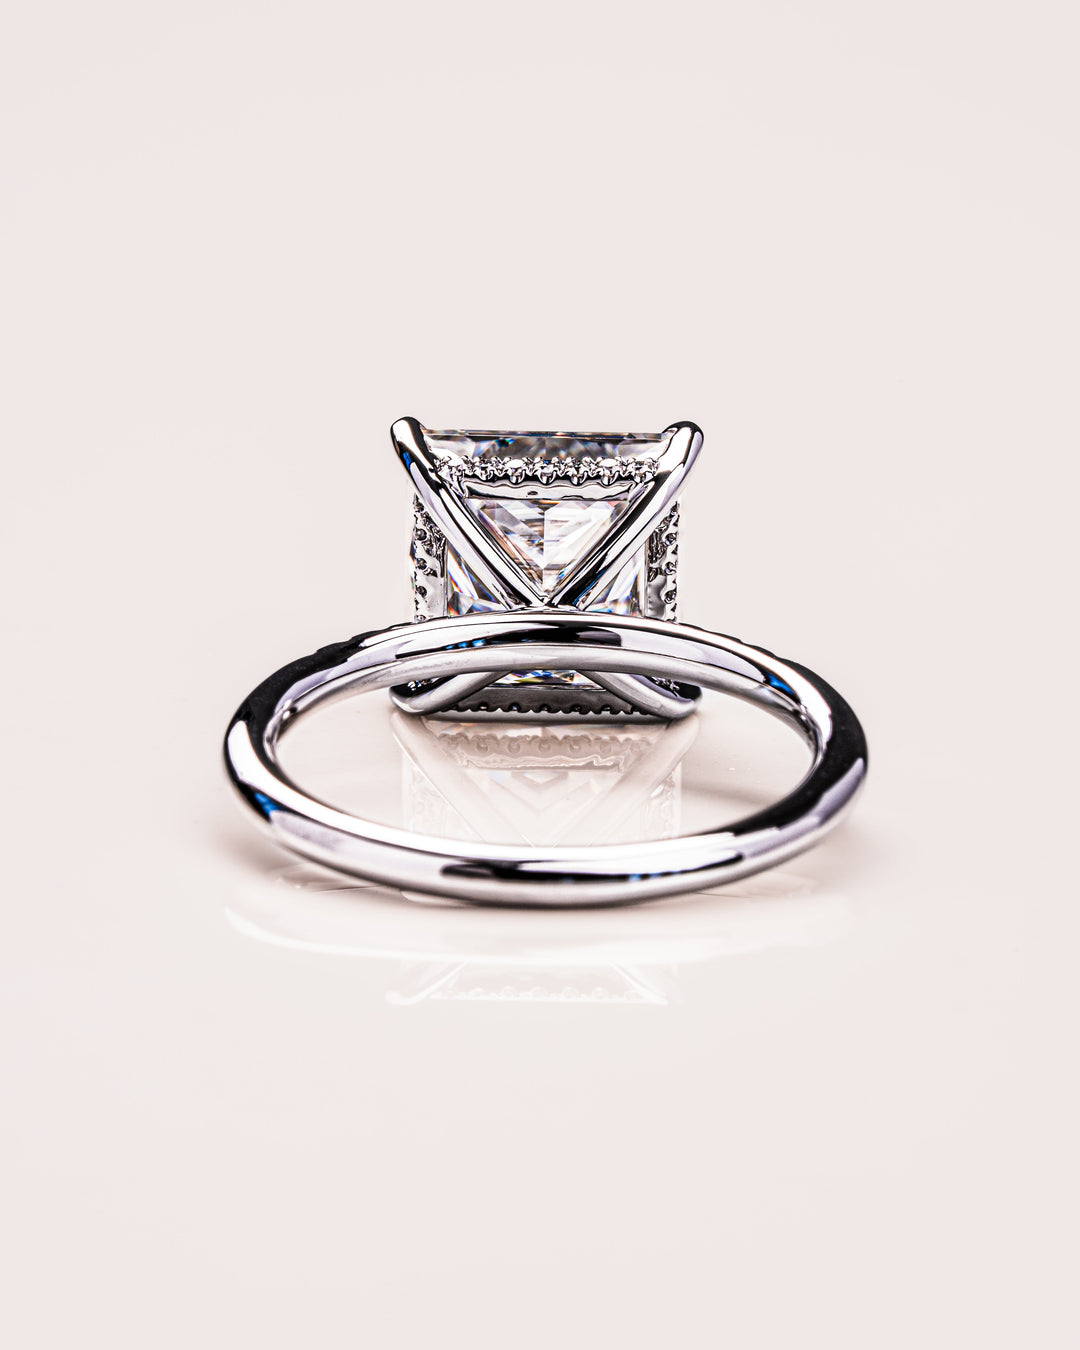 2.87 CT Princess Cut Moissanite Solitaire Engagement Ring With Hidden Halo Setting